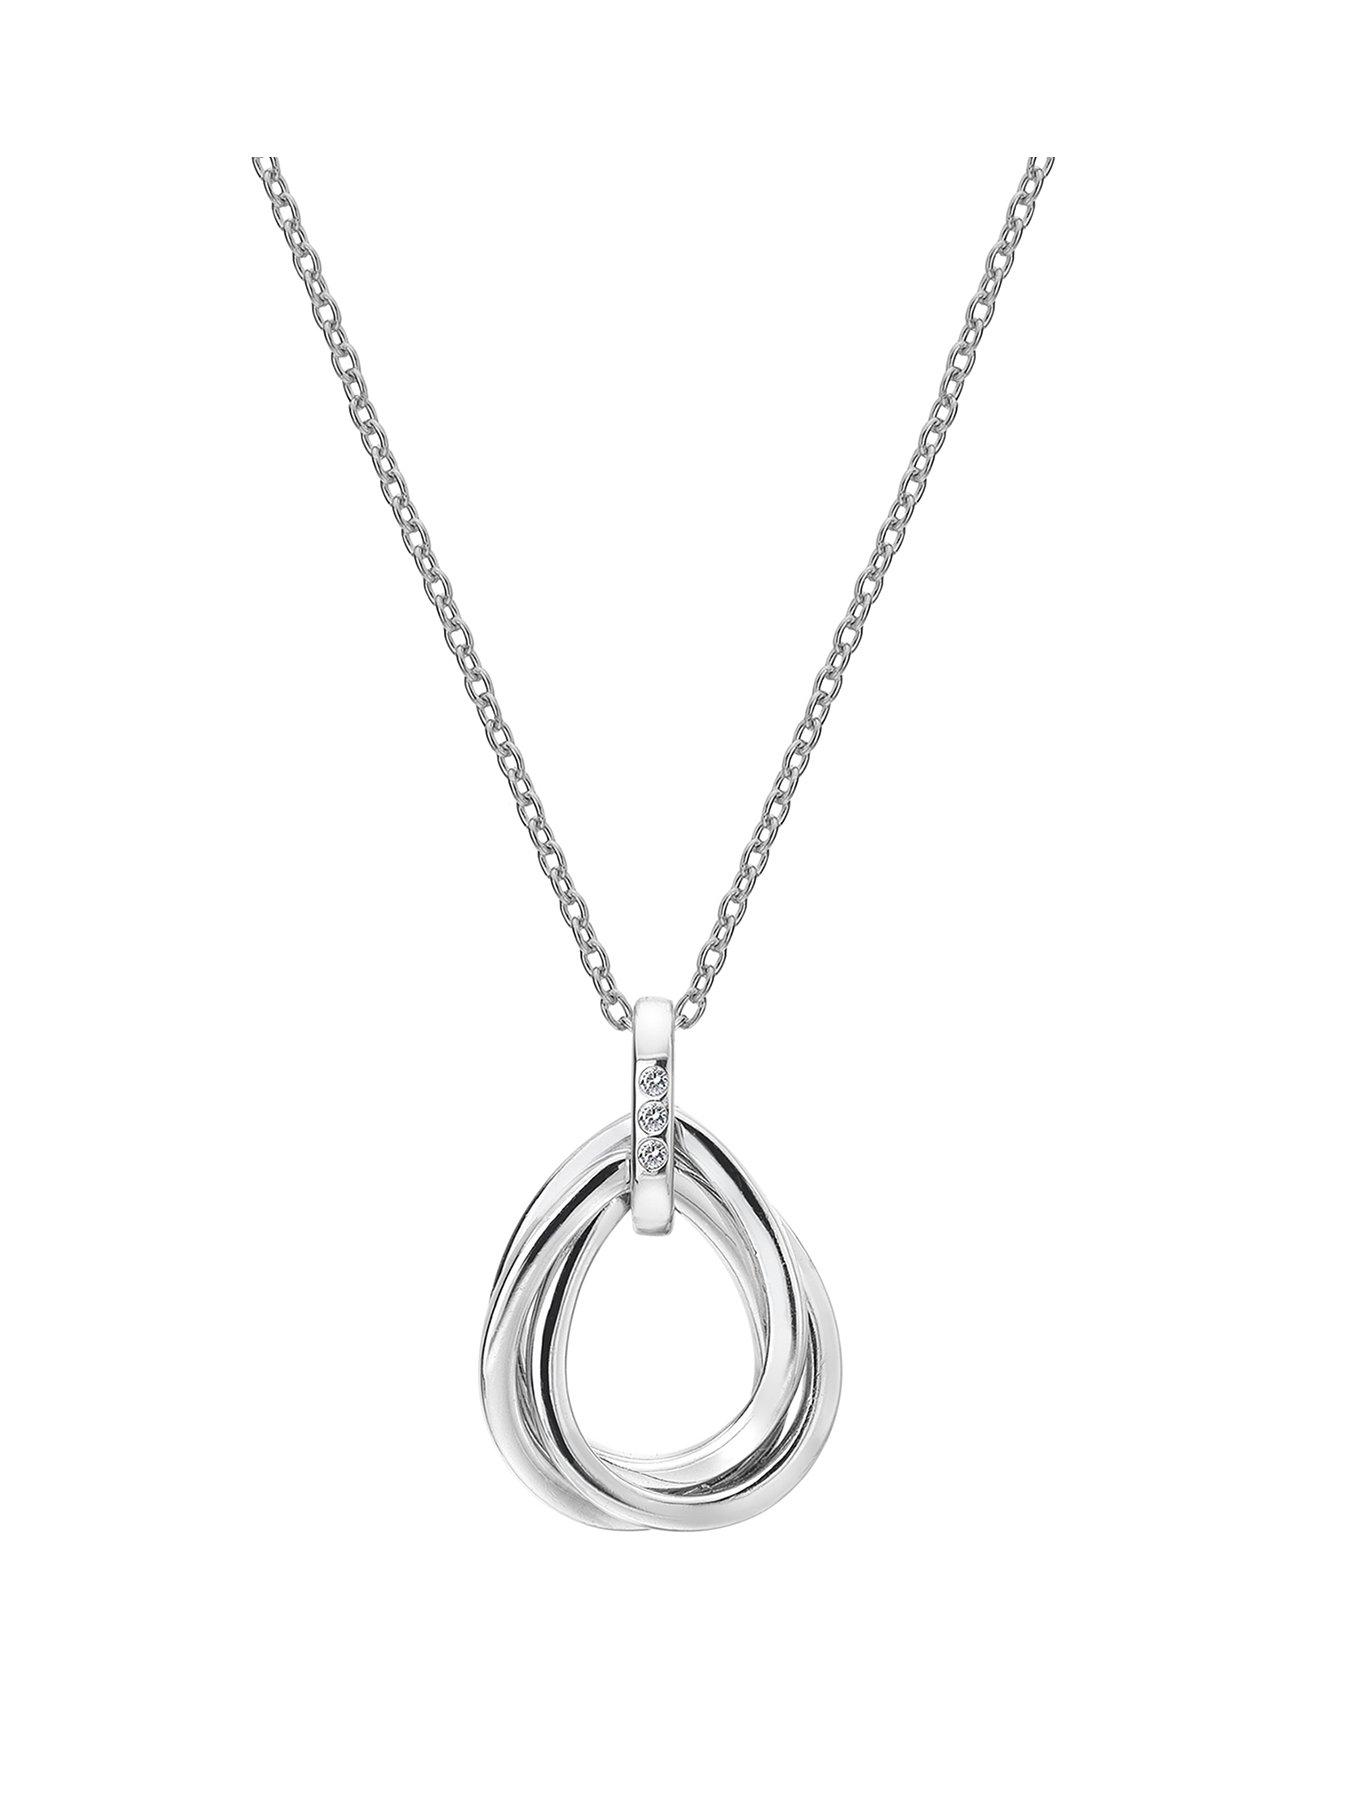 Womens | Necklaces | Gifts & jewellery | www.littlewoods.com